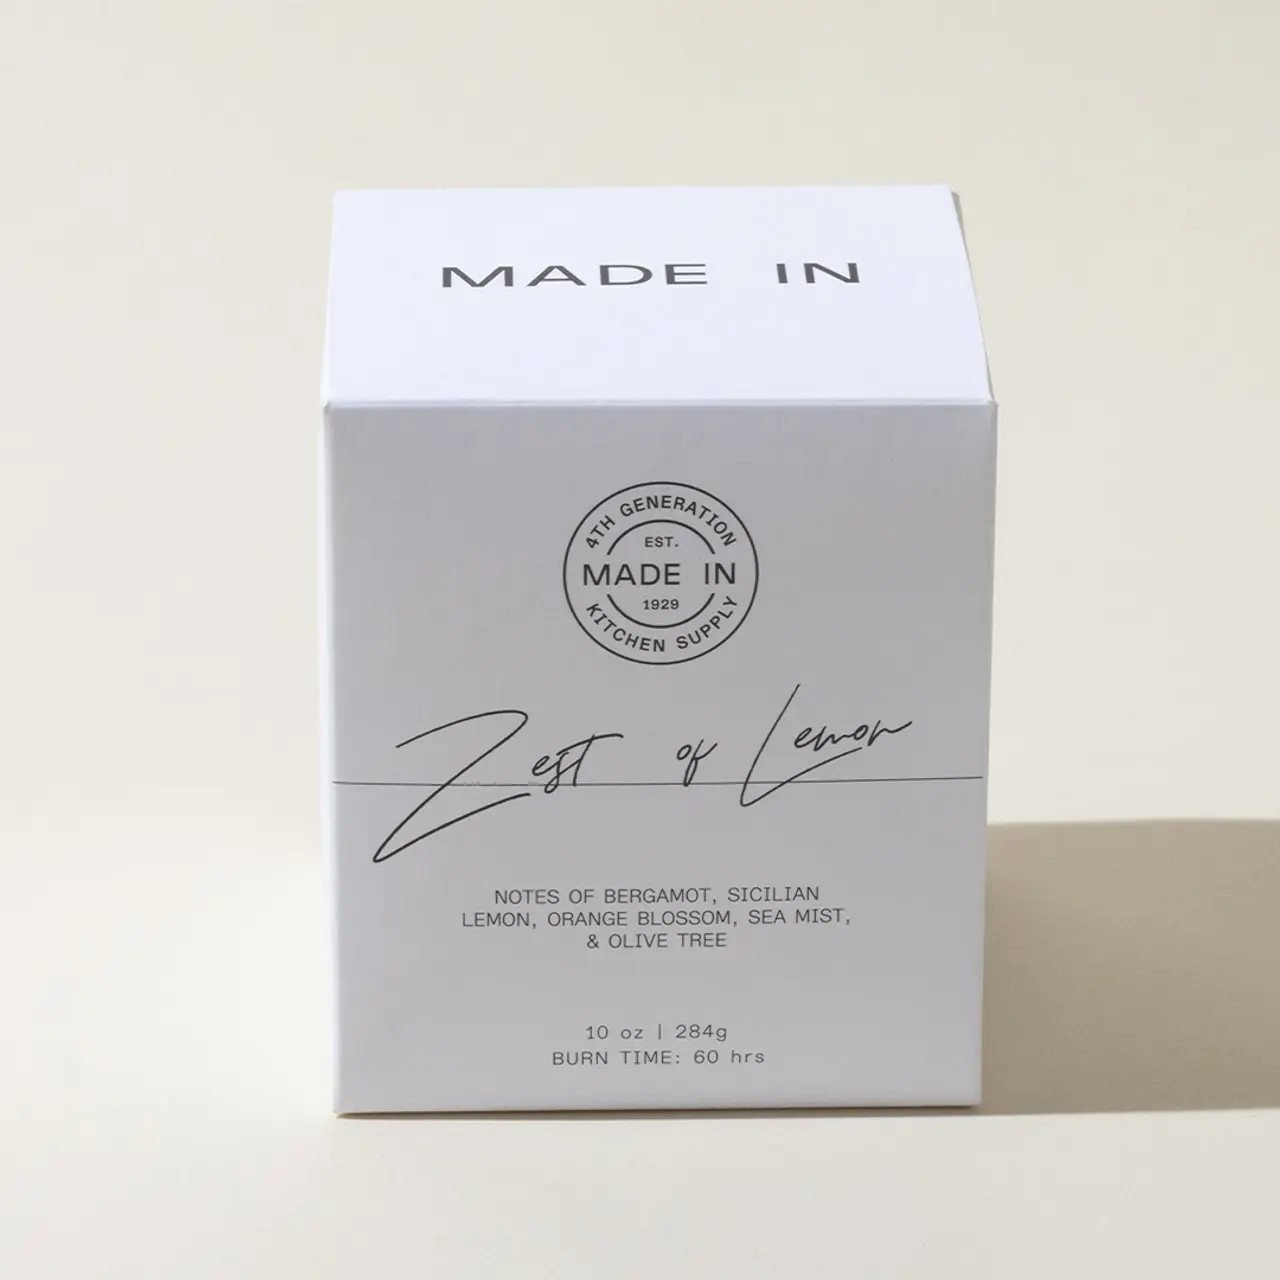 A minimalist-designed candle box with text "MADE IN ___ GENERATION MADE IN ____ KITCHEN SINK" and "Zest of Lemon" featuring notes of bergamot, Sicilian lemon, and other fragrances listed.